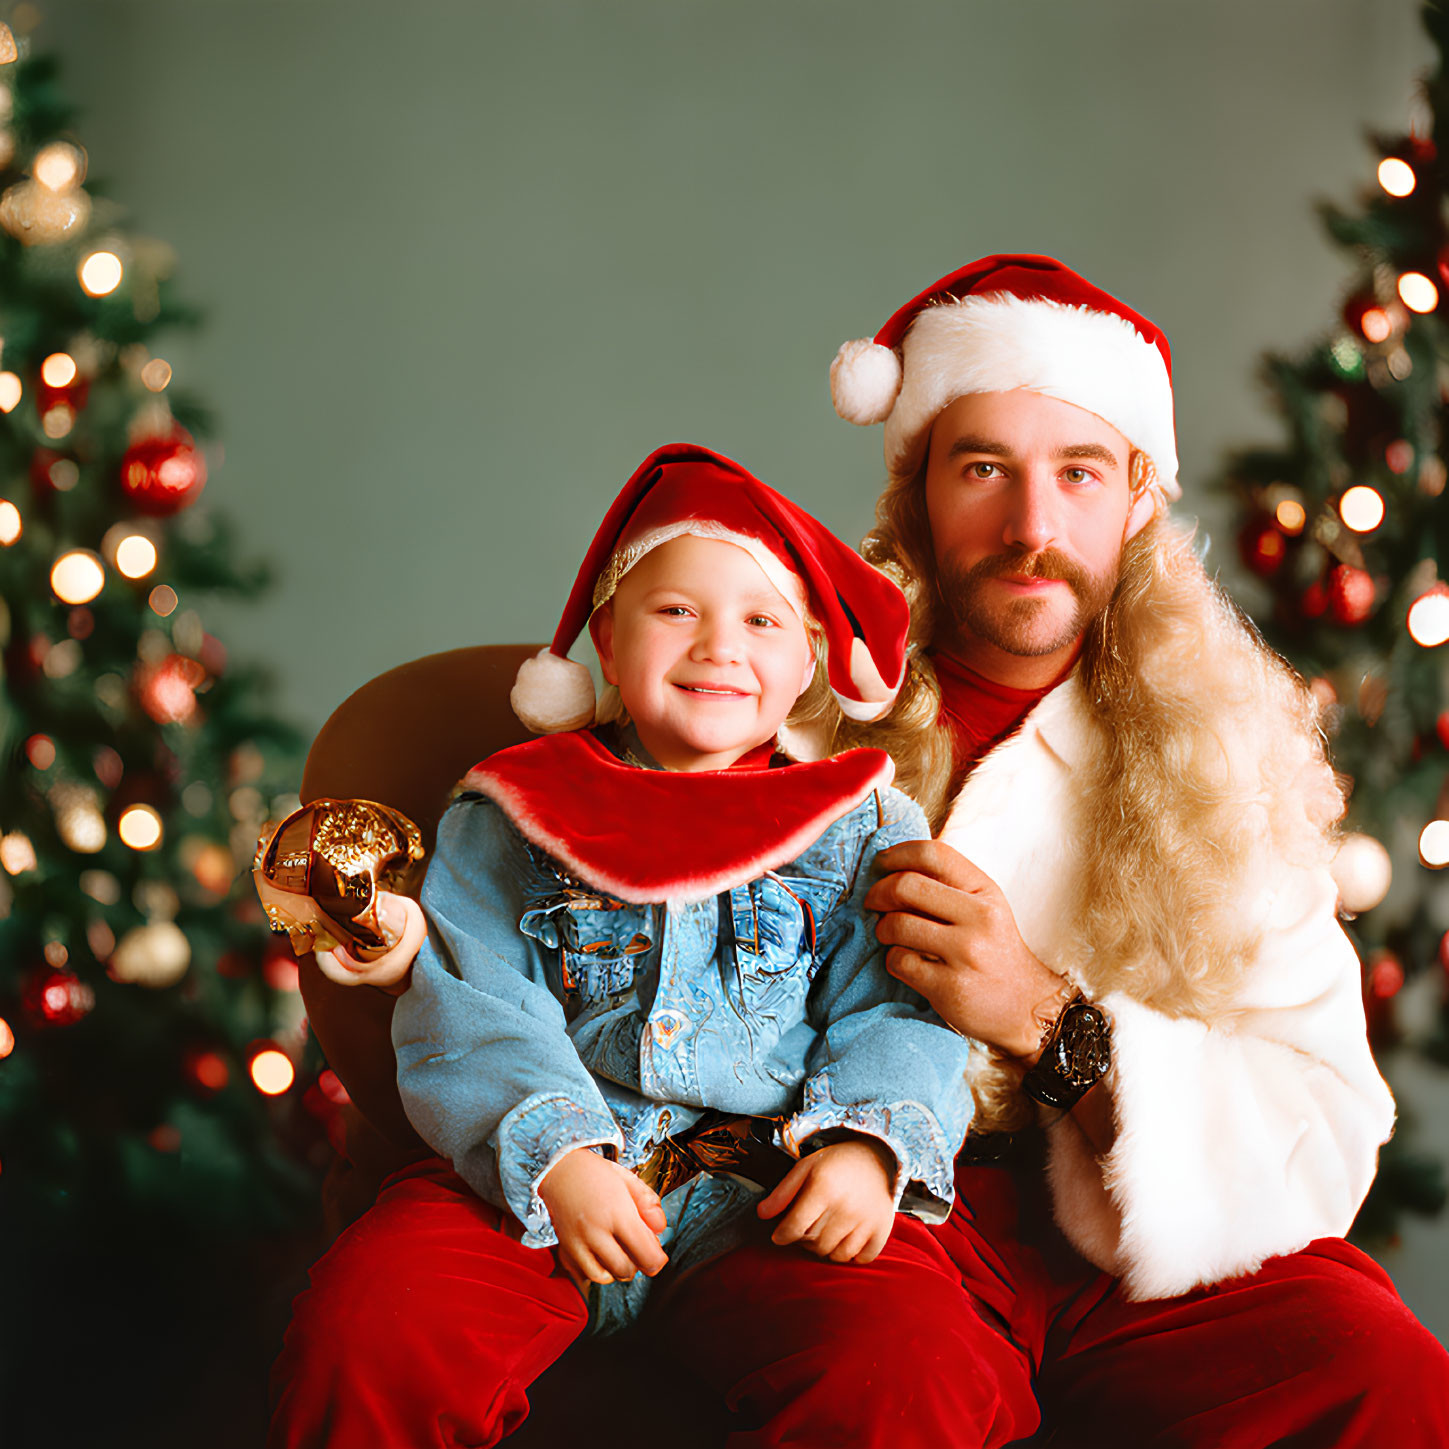 Child in denim jacket and Santa Claus in Santa hats pose in front of Christmas tree